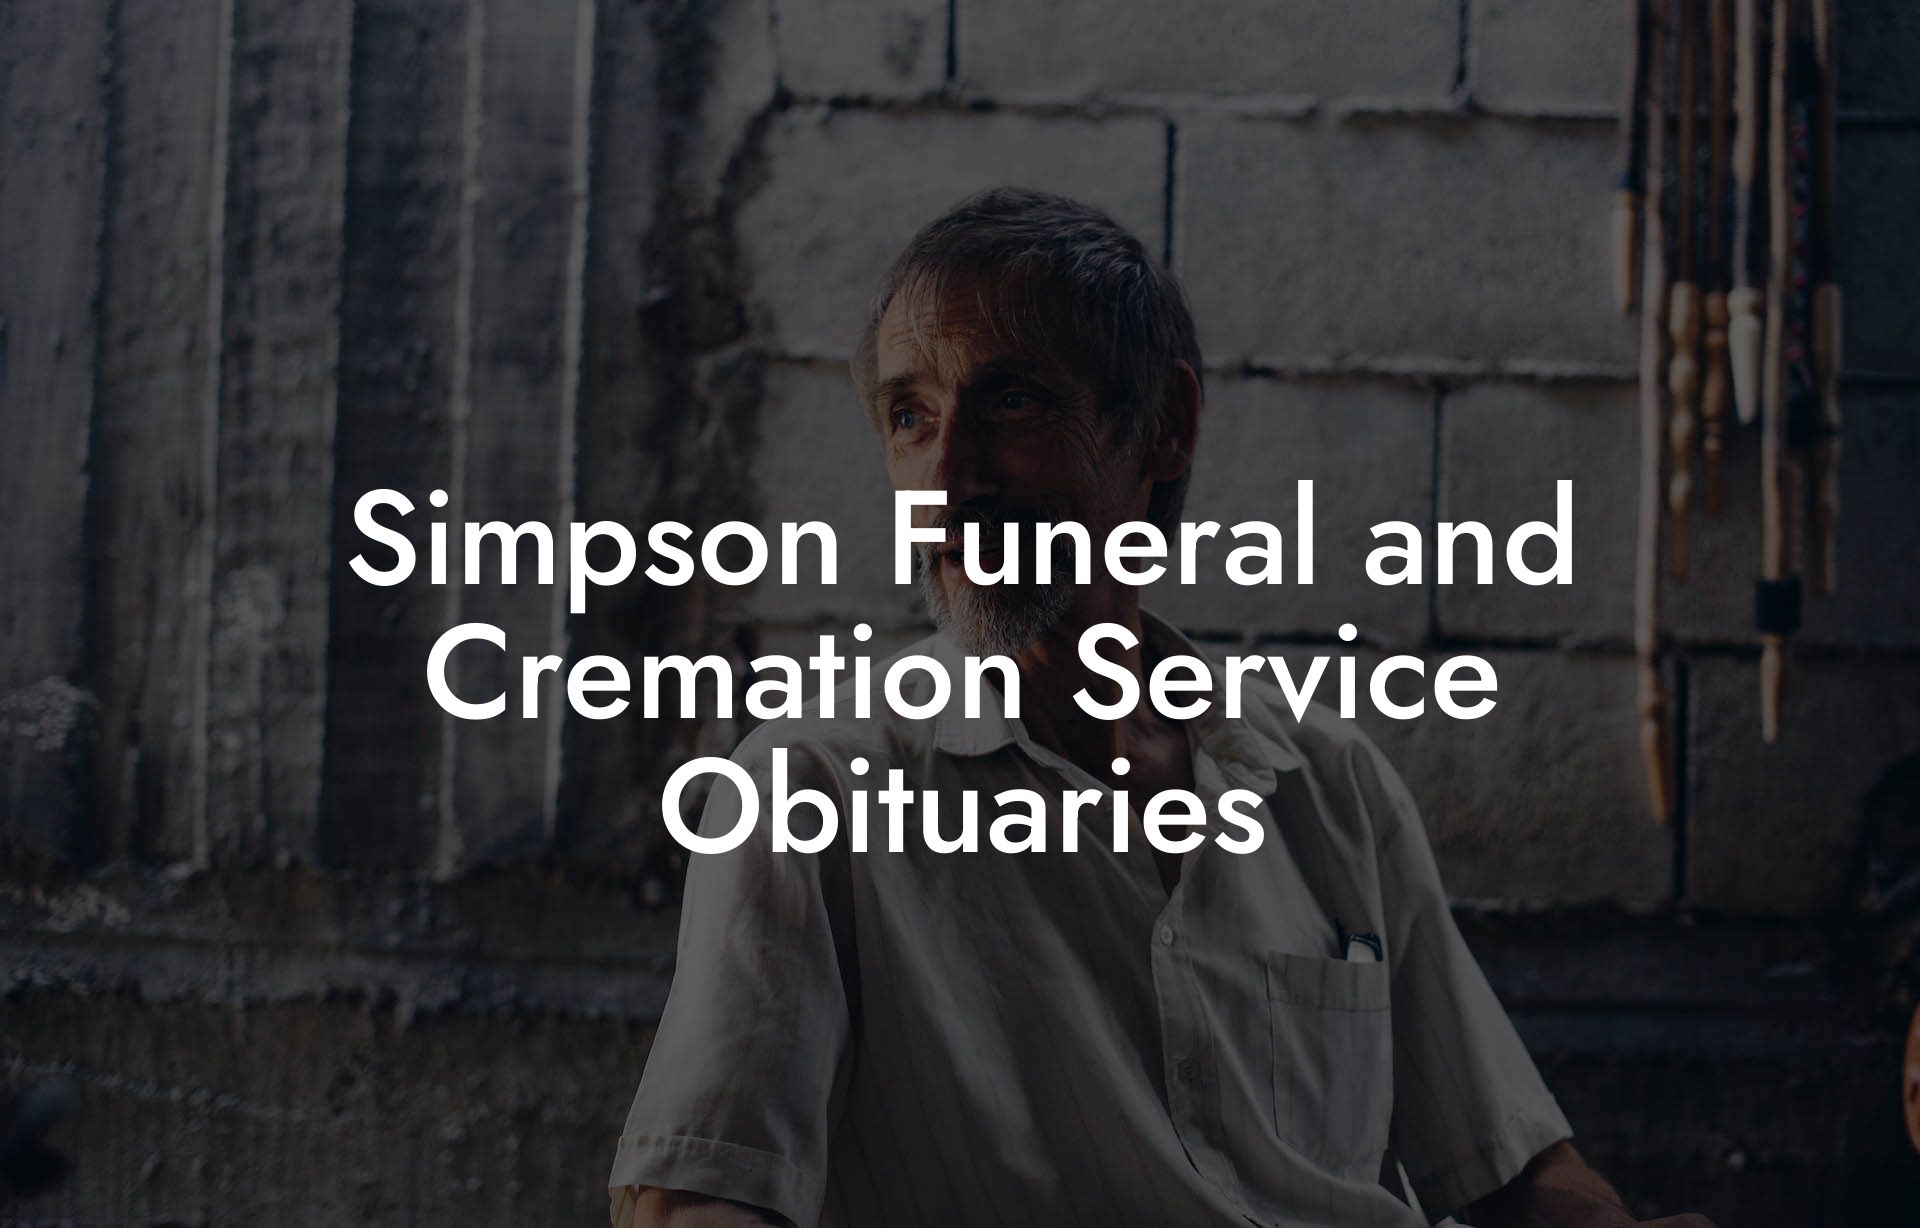 Simpson Funeral and Cremation Service Obituaries